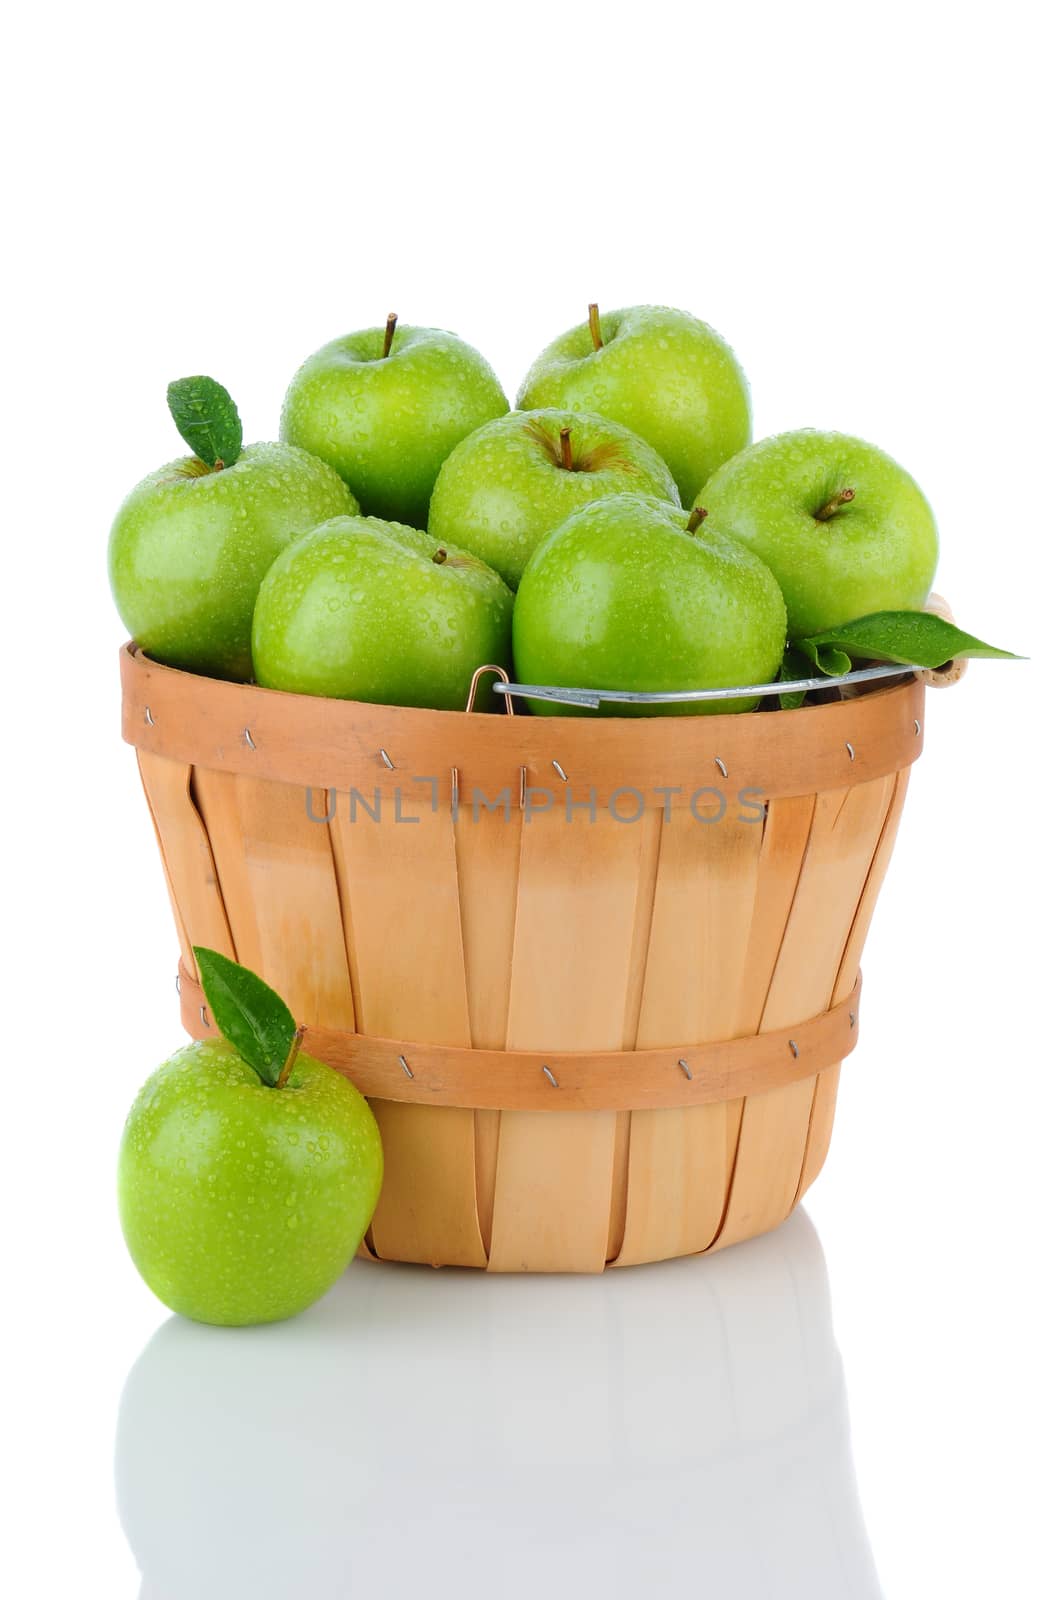 A basket full of fresh picked Granny Smith. Vertical format over a white background with reflection.